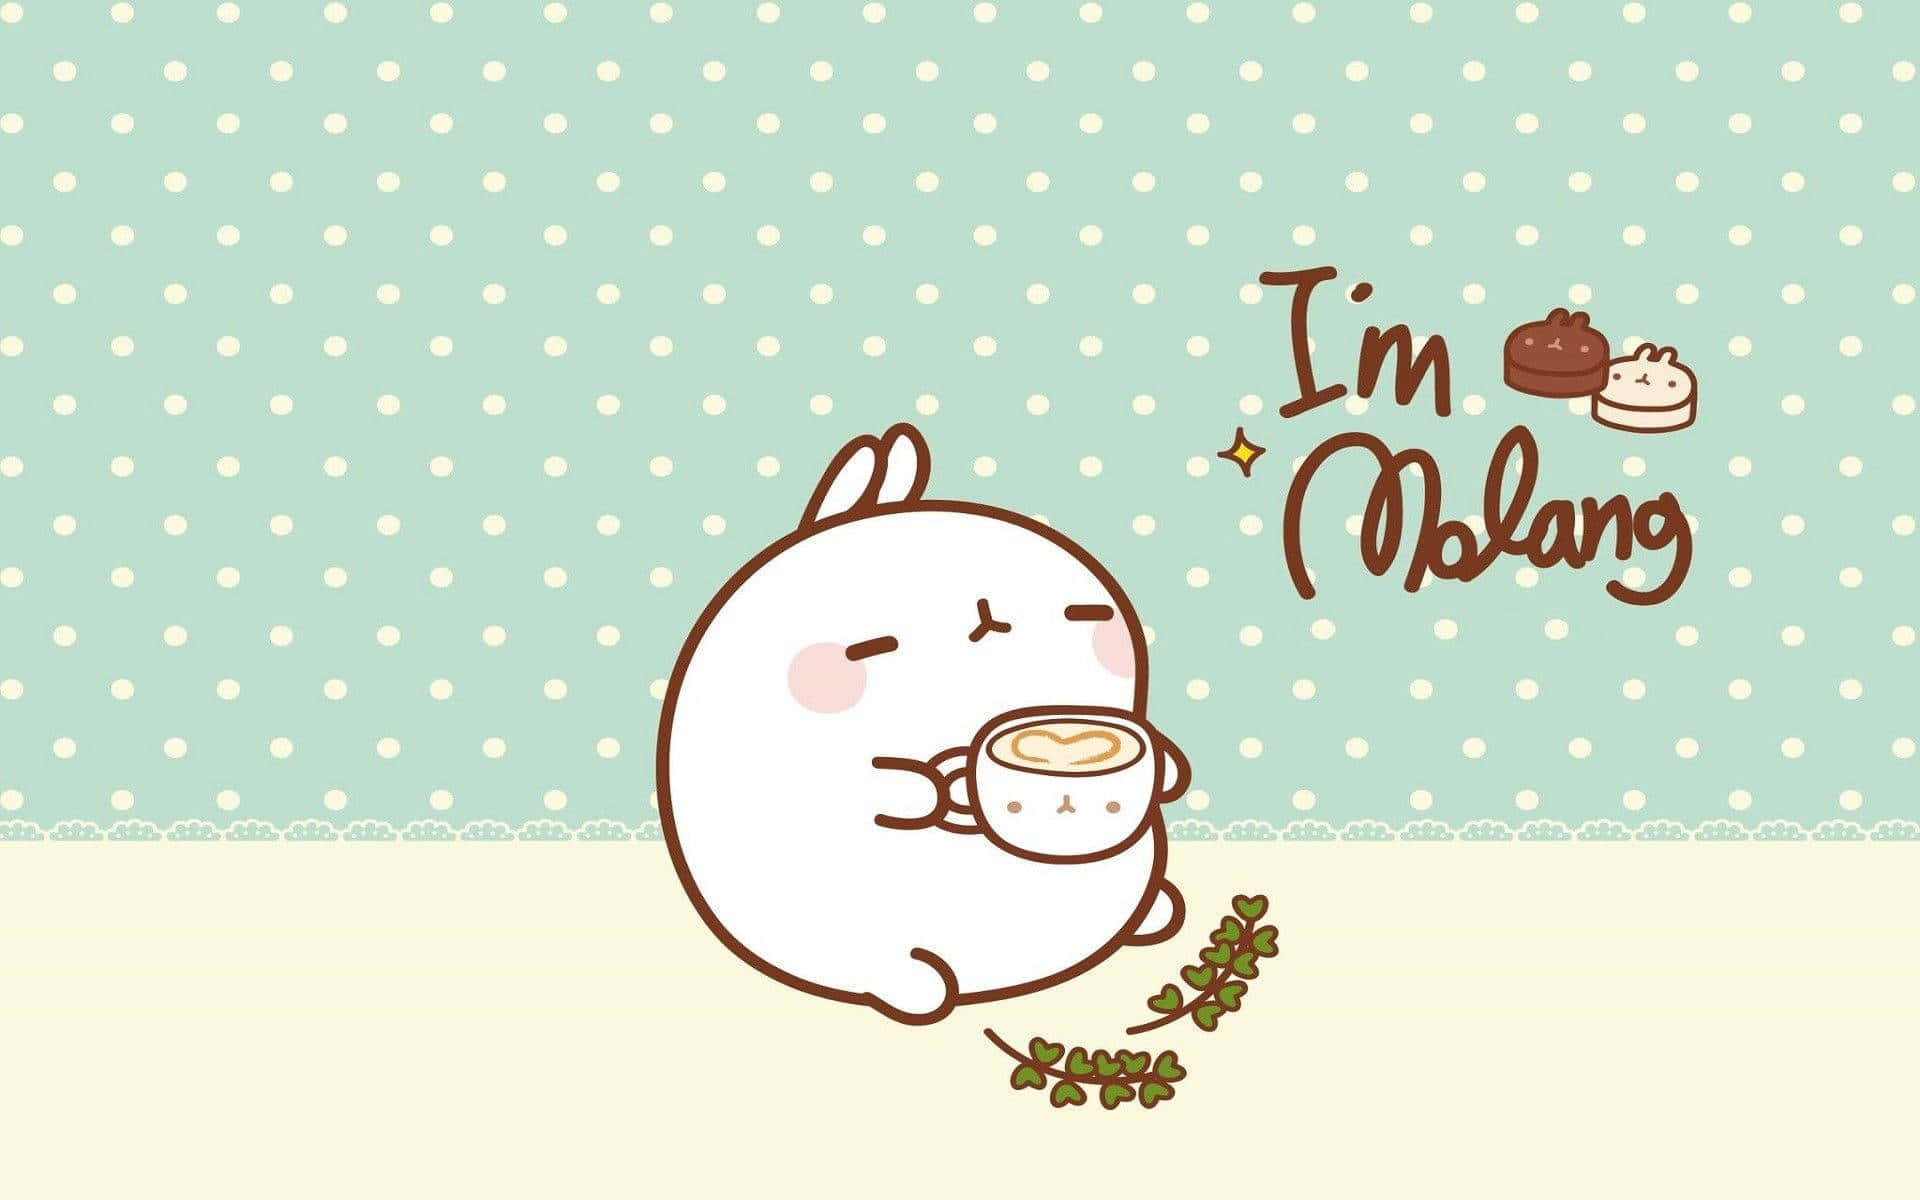 Get Ready for Fun Tasks with Pusheen PC Wallpaper